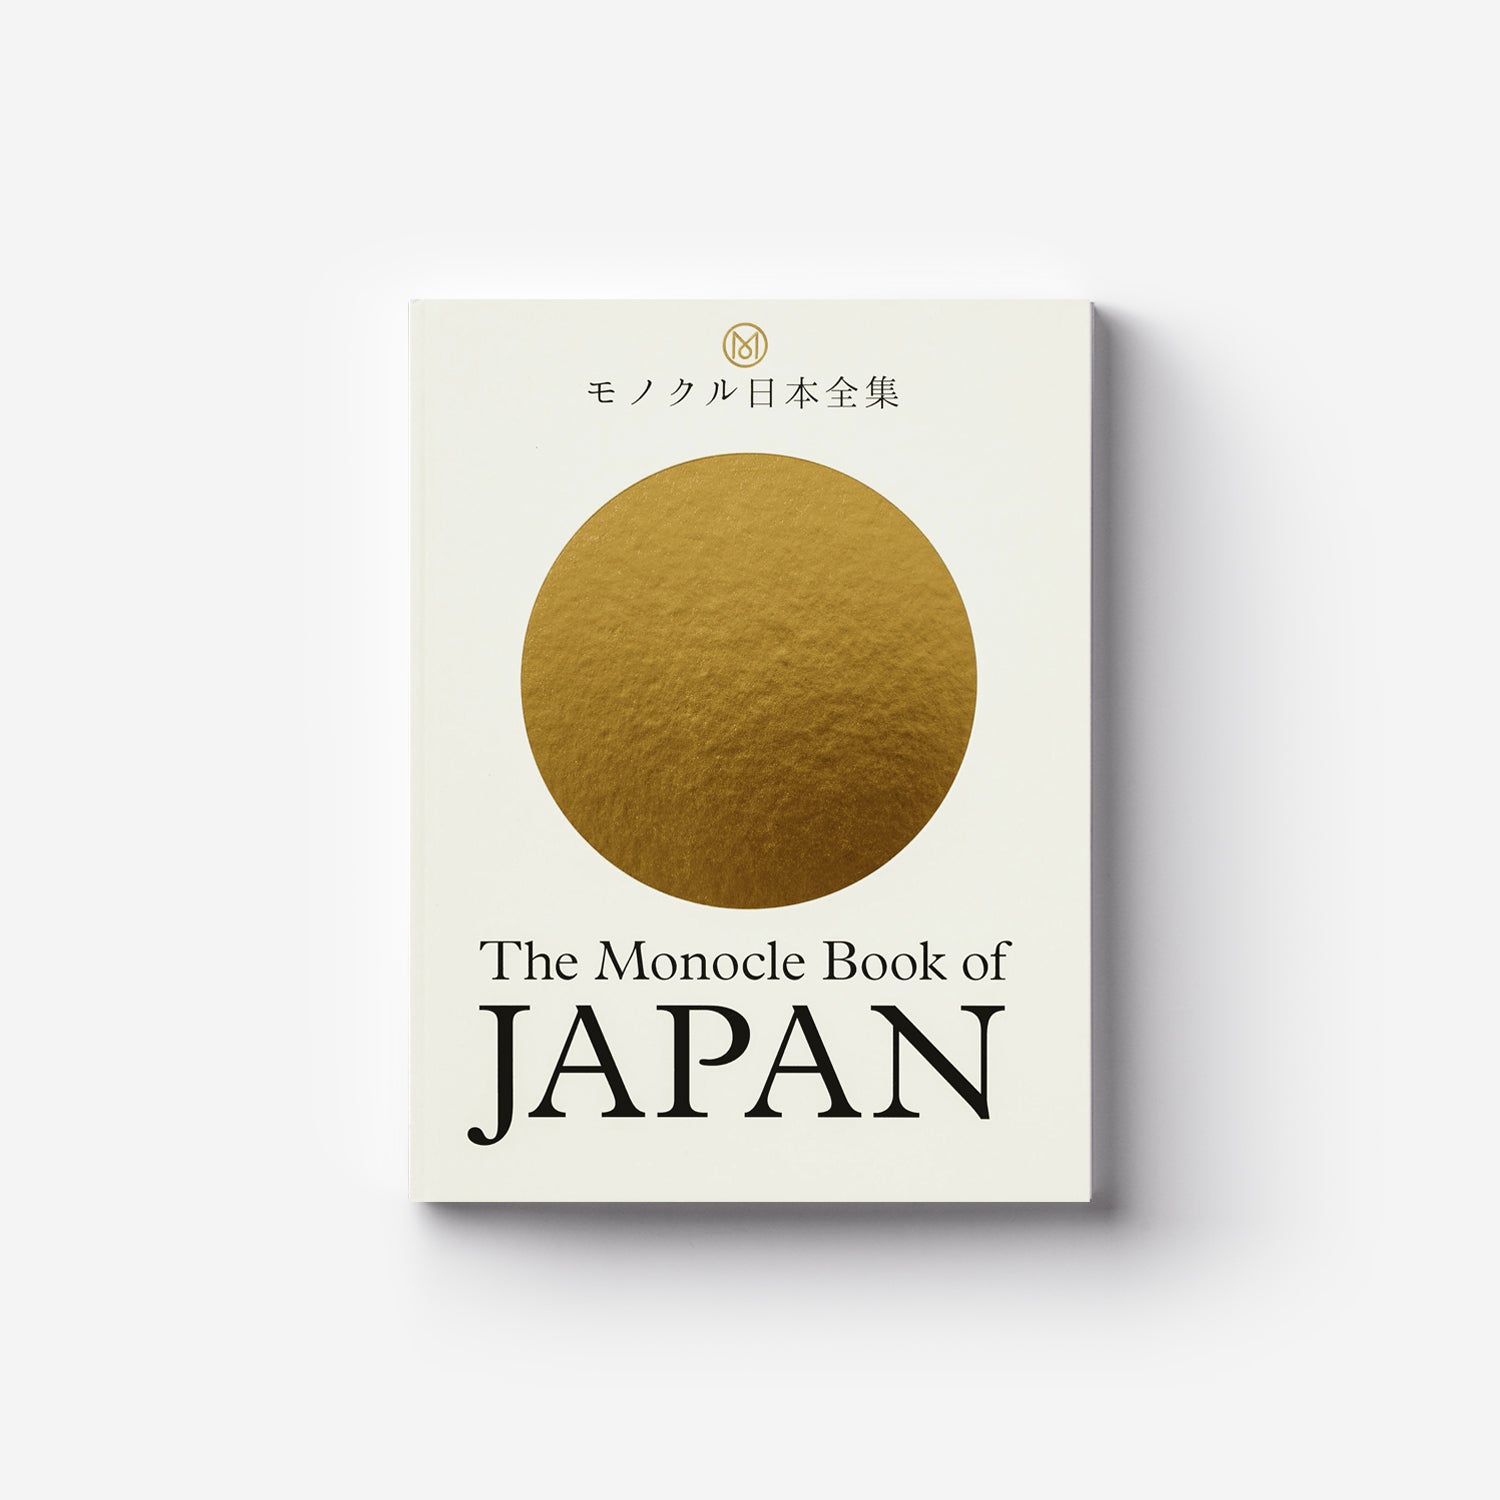 The Monocle Book of Japan